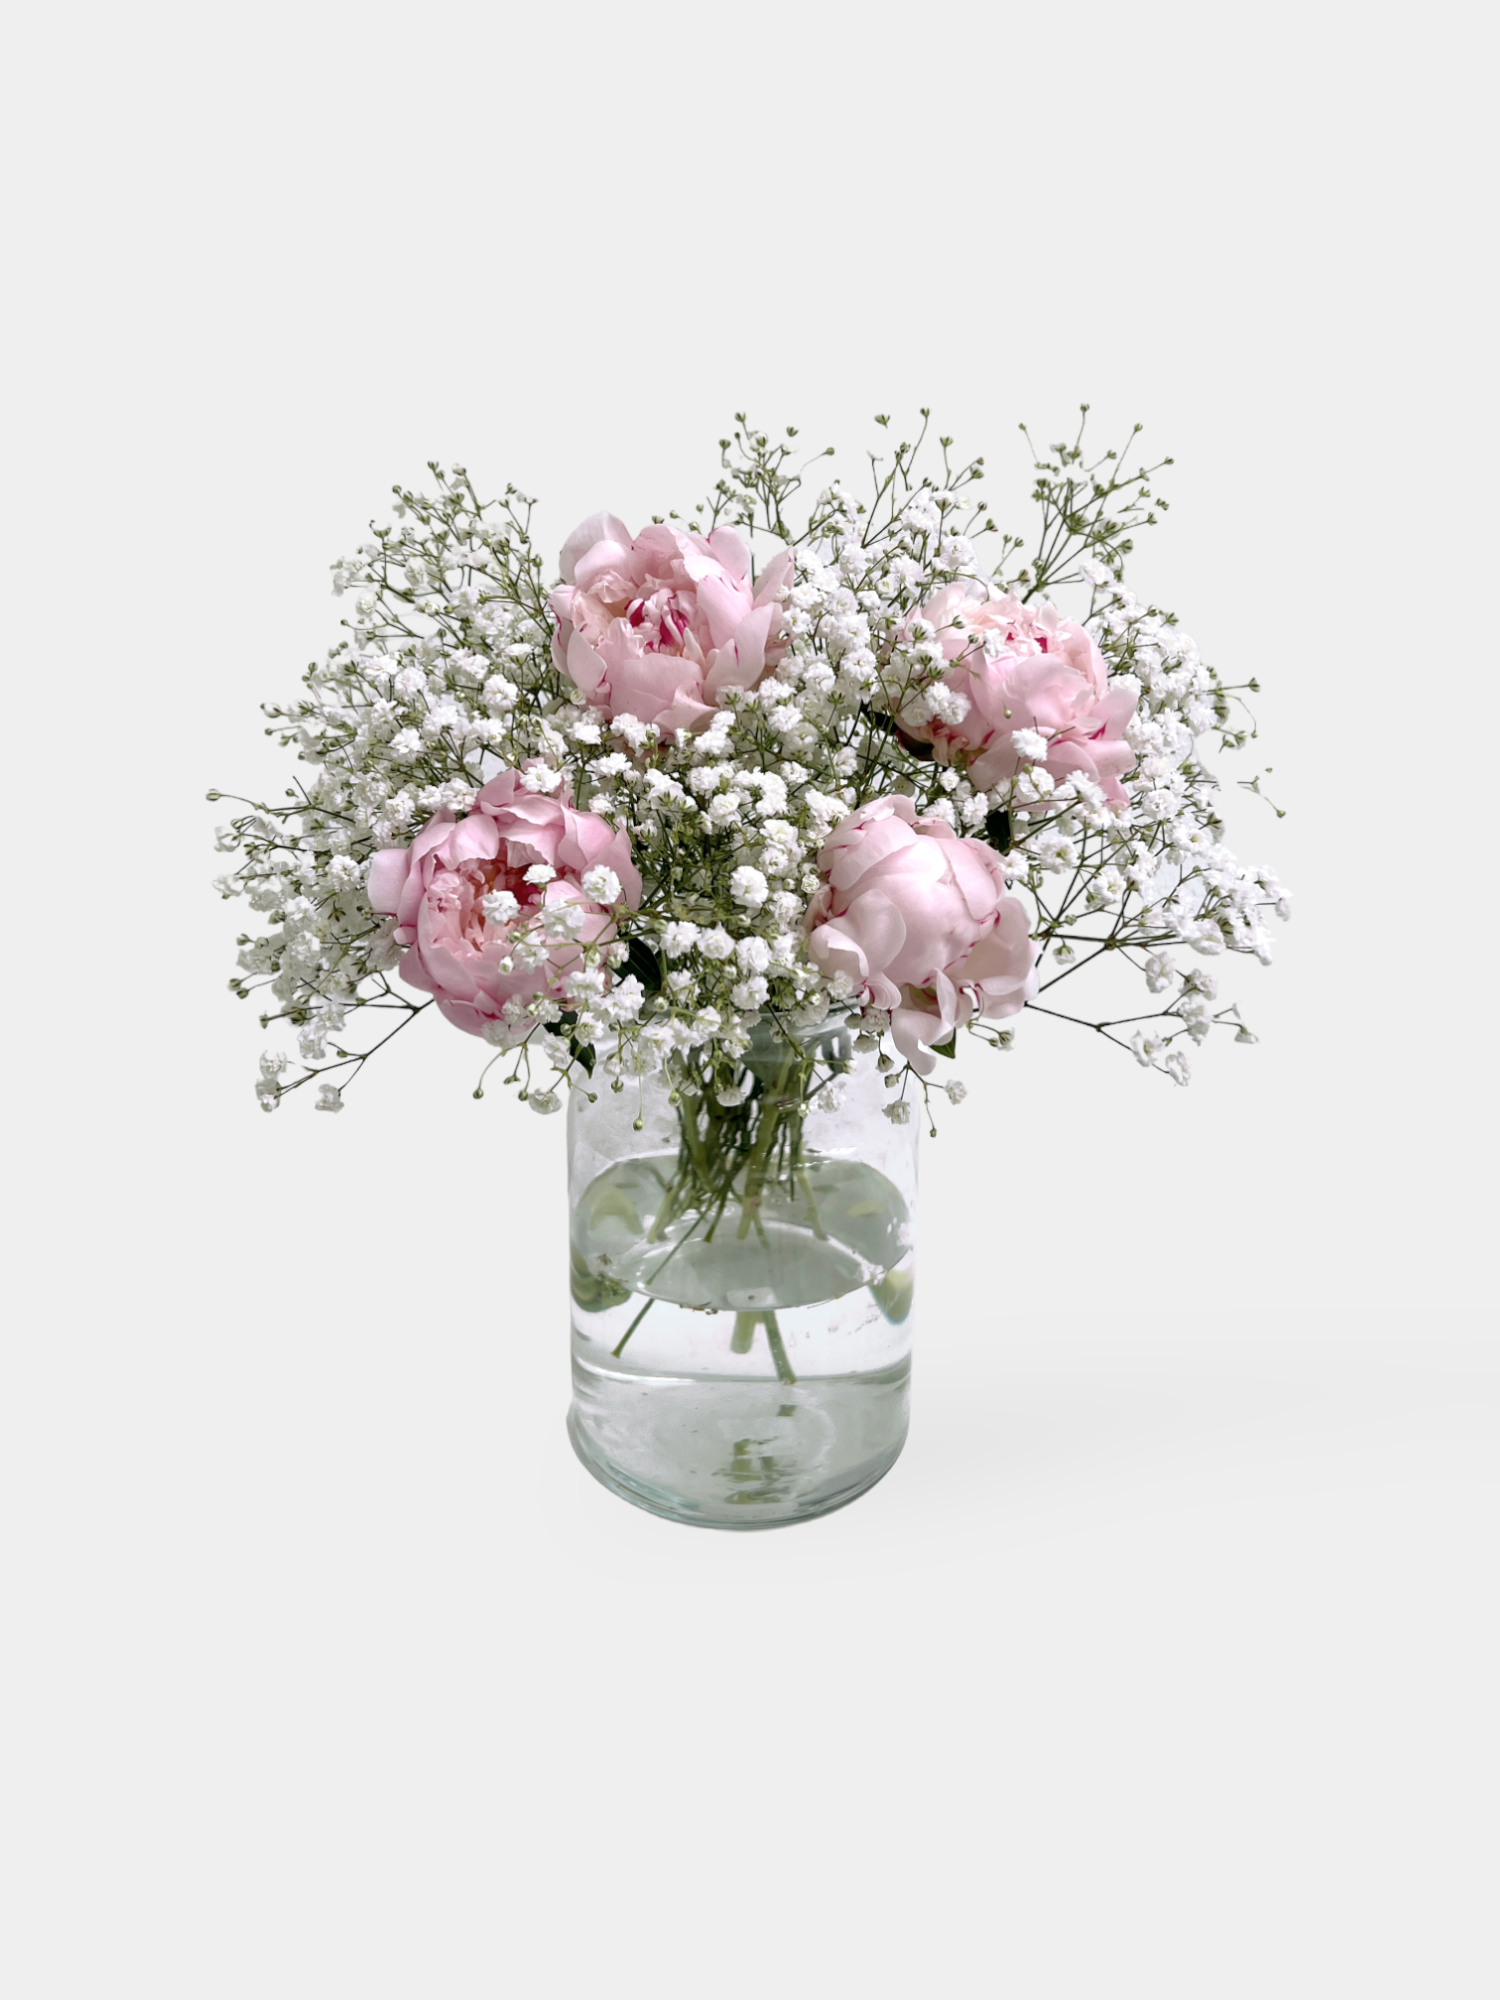 A Pink Peony Cloud - Blush Pink Peonies and Baby's Breath - FLOWERFIX